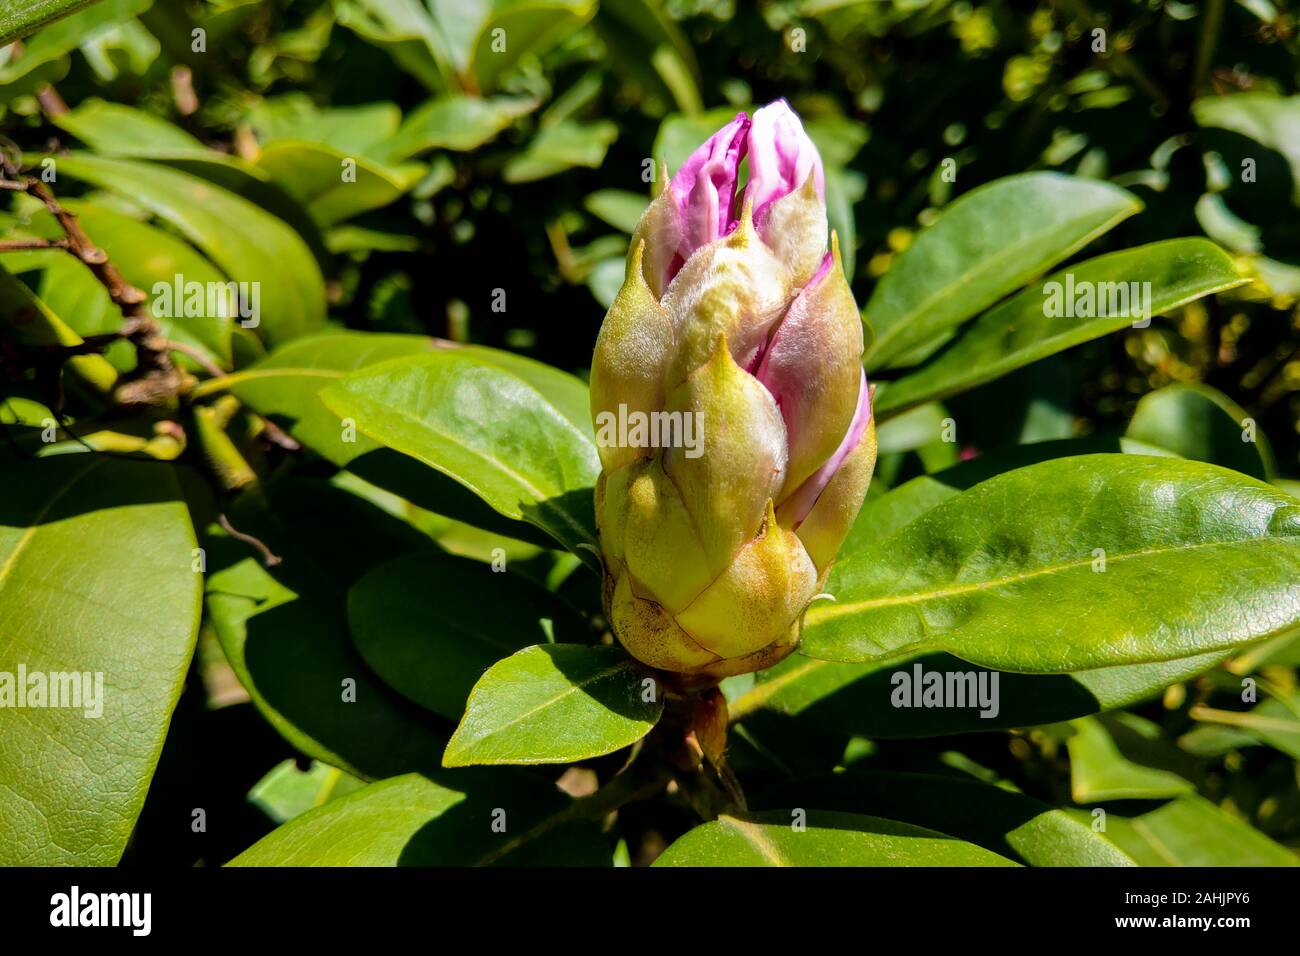 Blown beautiful magnolia flower on a tree with green leaves Stock Photo